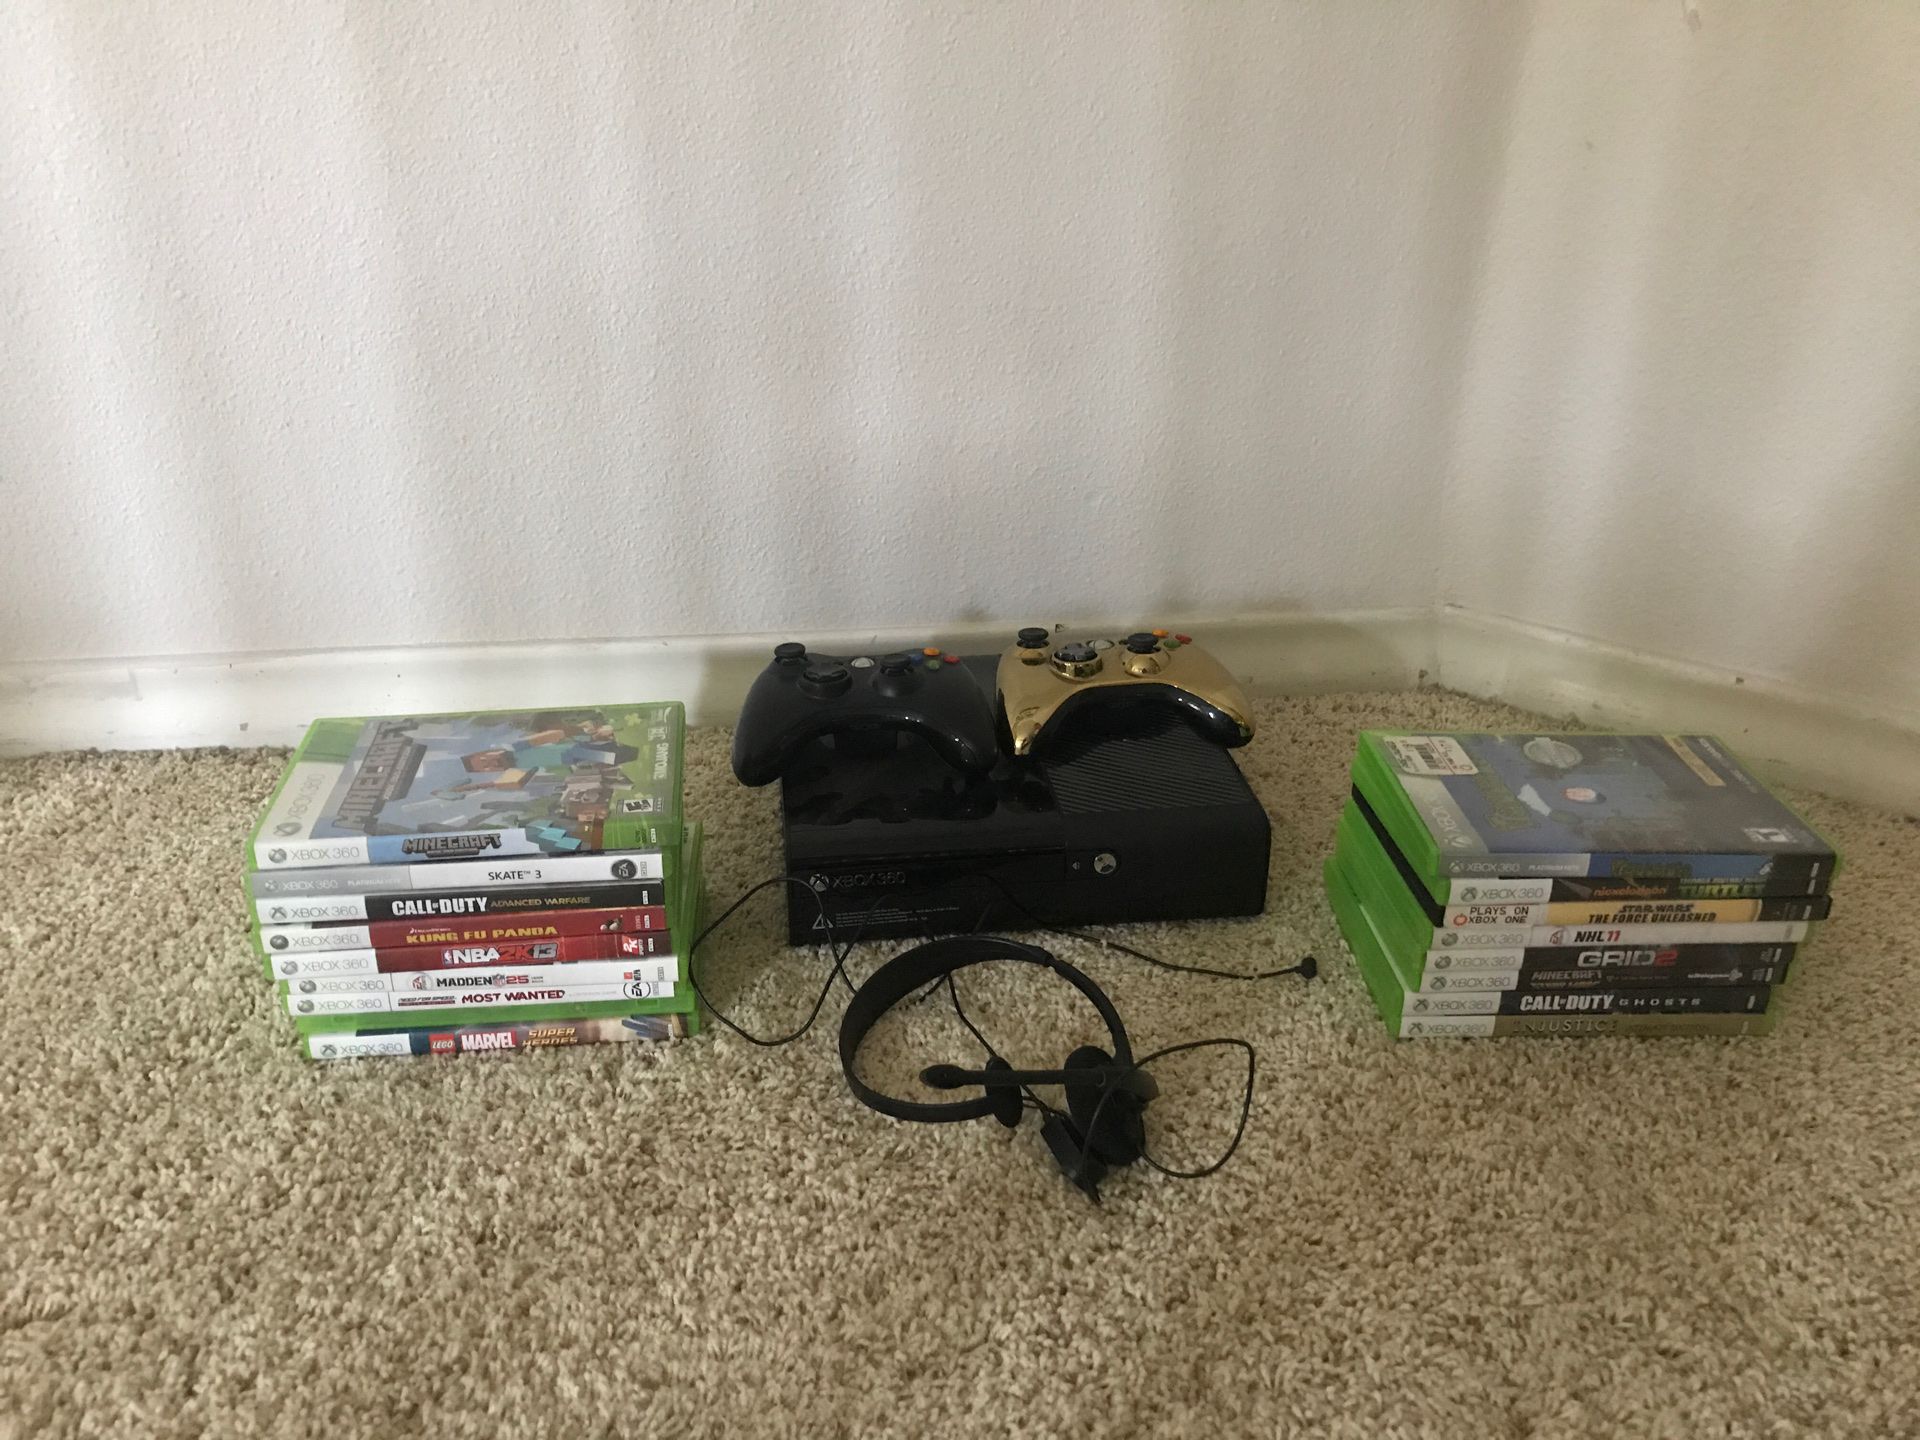 Xbox 360 E. COMES WITH CABLES. 2 controllers, headset, and 18 games